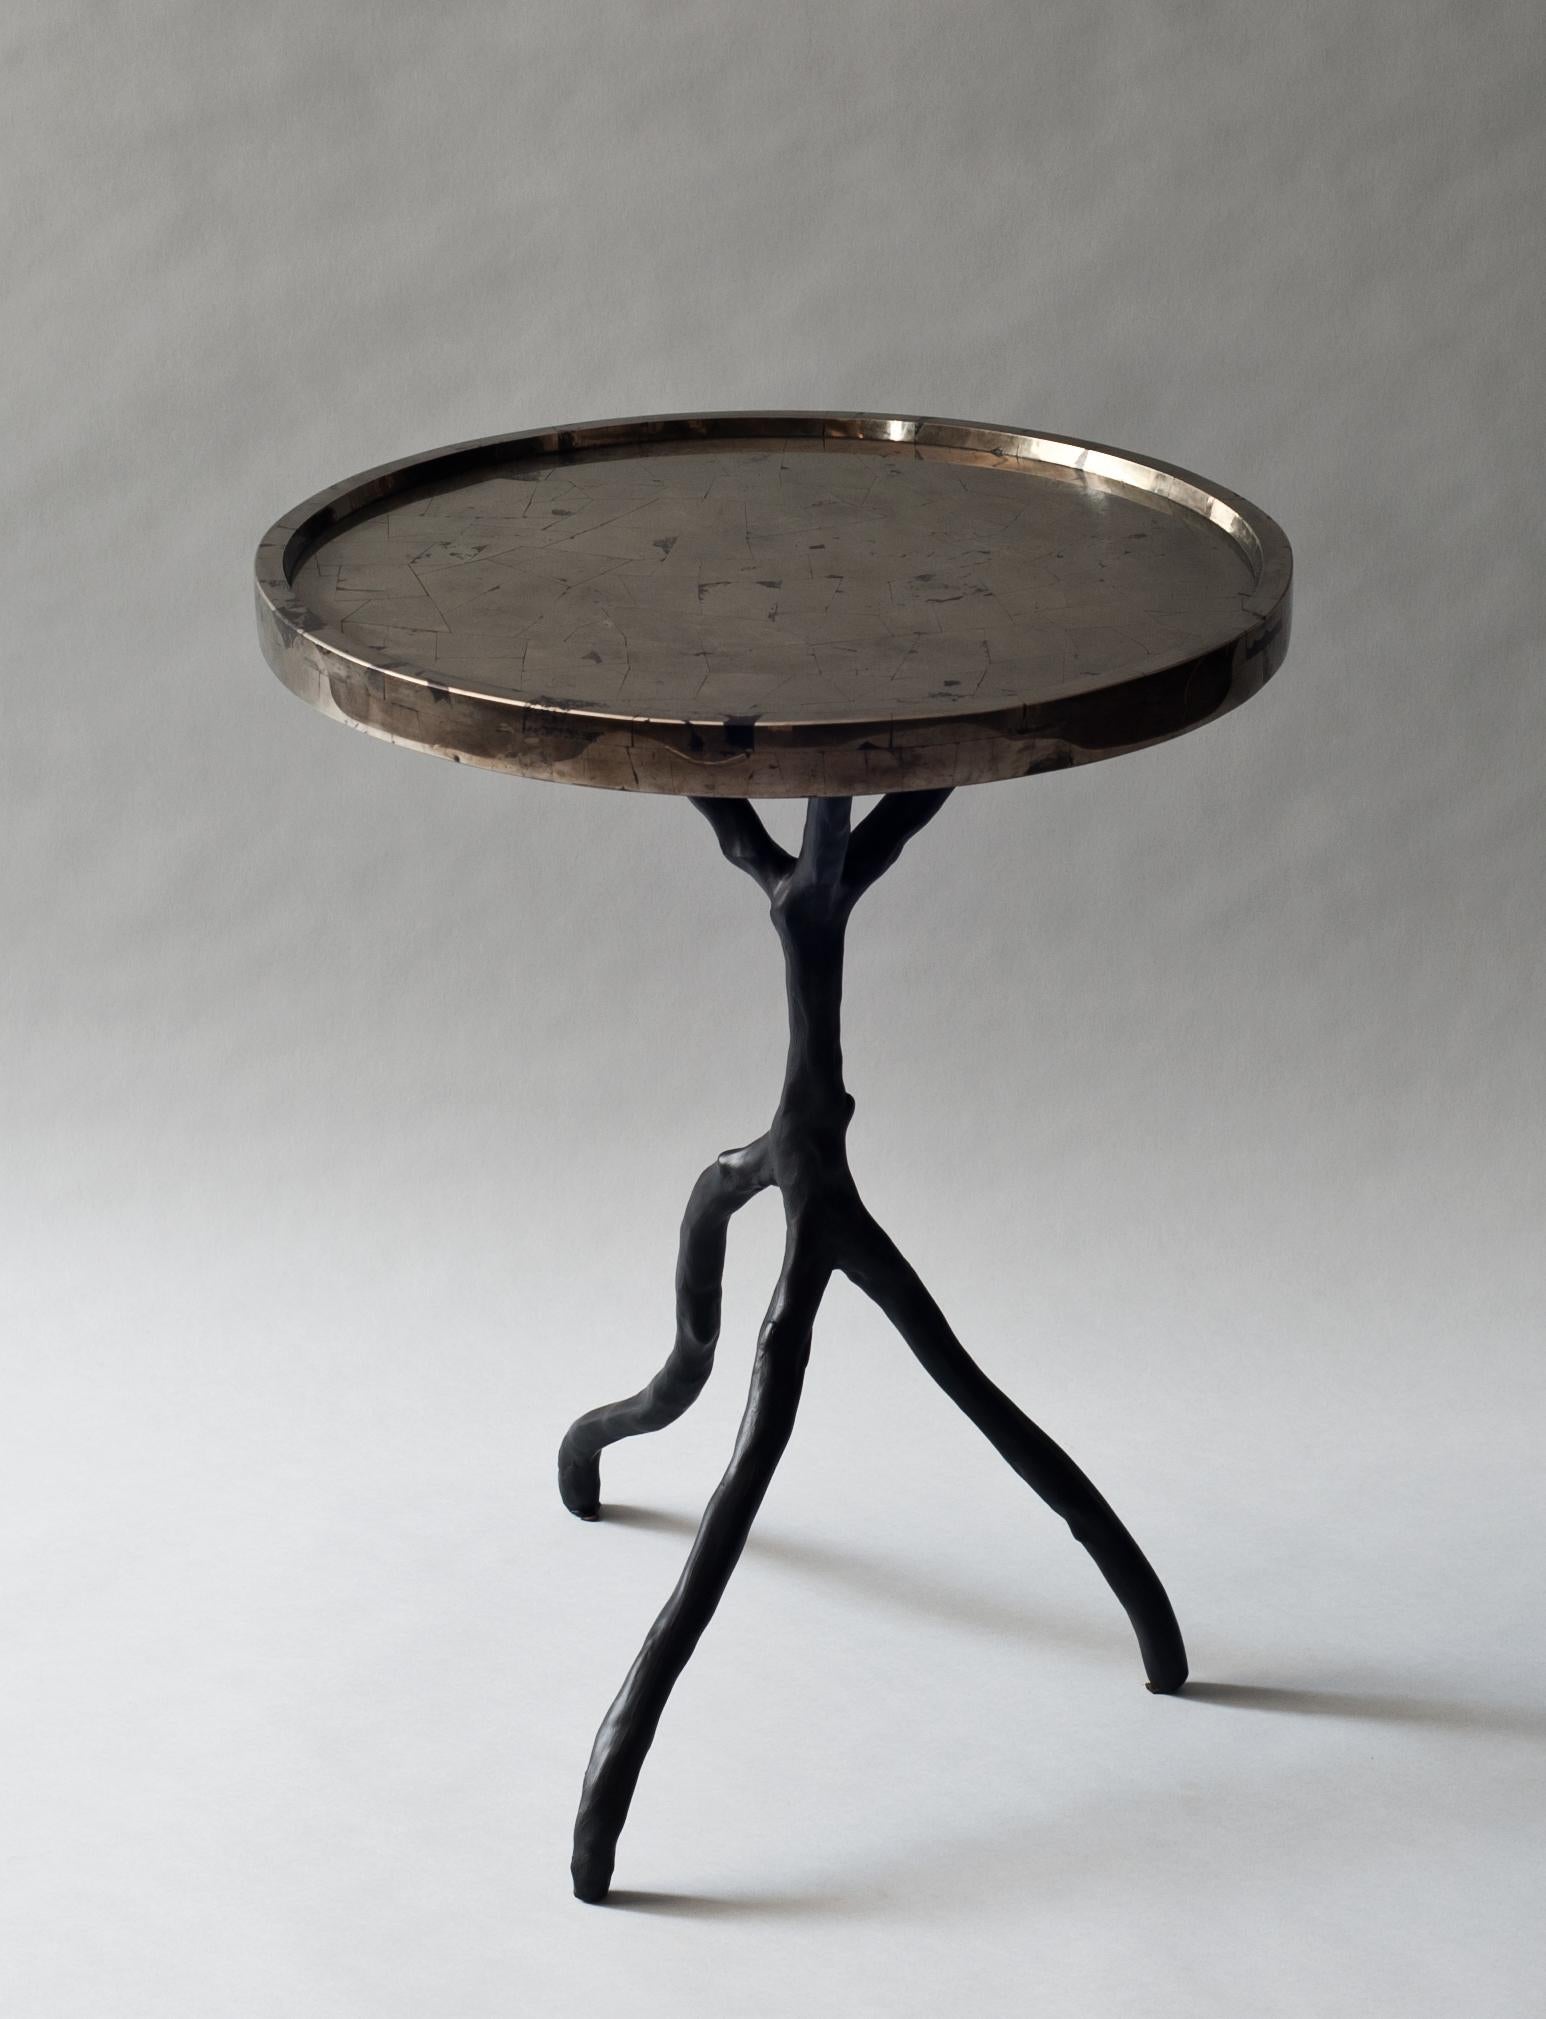 Solstice side table by DeMuro Das
Dimensions: 50 x H 64 cm
Materials: Pyrite (Golden) - Polished (Random)
Sculpted Noir
Dimensions and finishes can be customized
DeMuro Das is an international design firm and the aesthetic and cultural